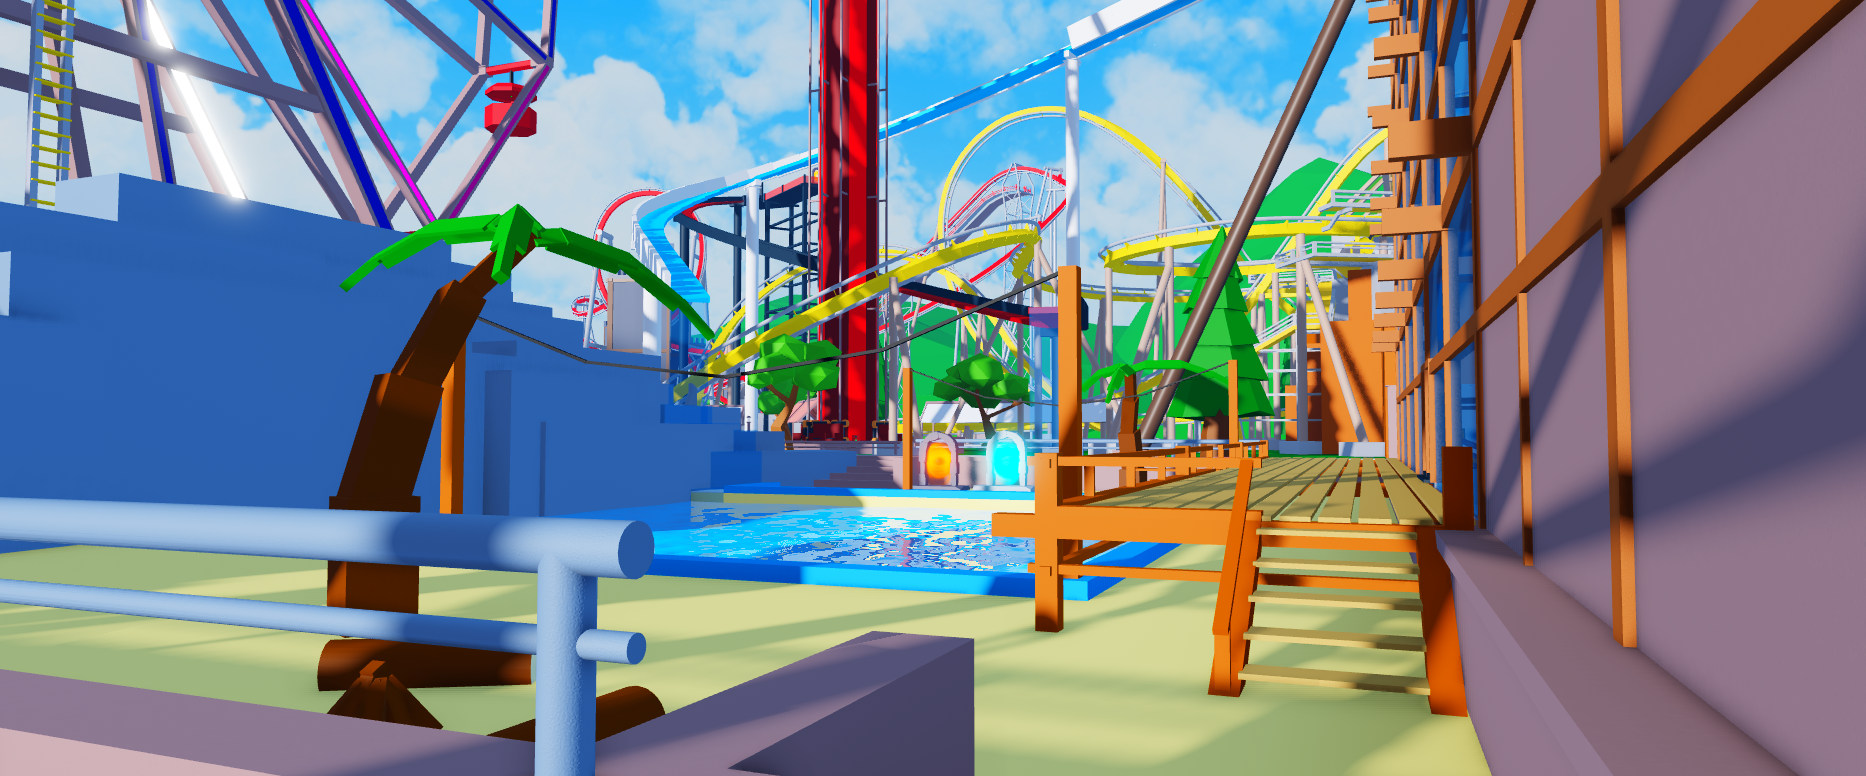 Park pool with water slides and roller coaster in the background.